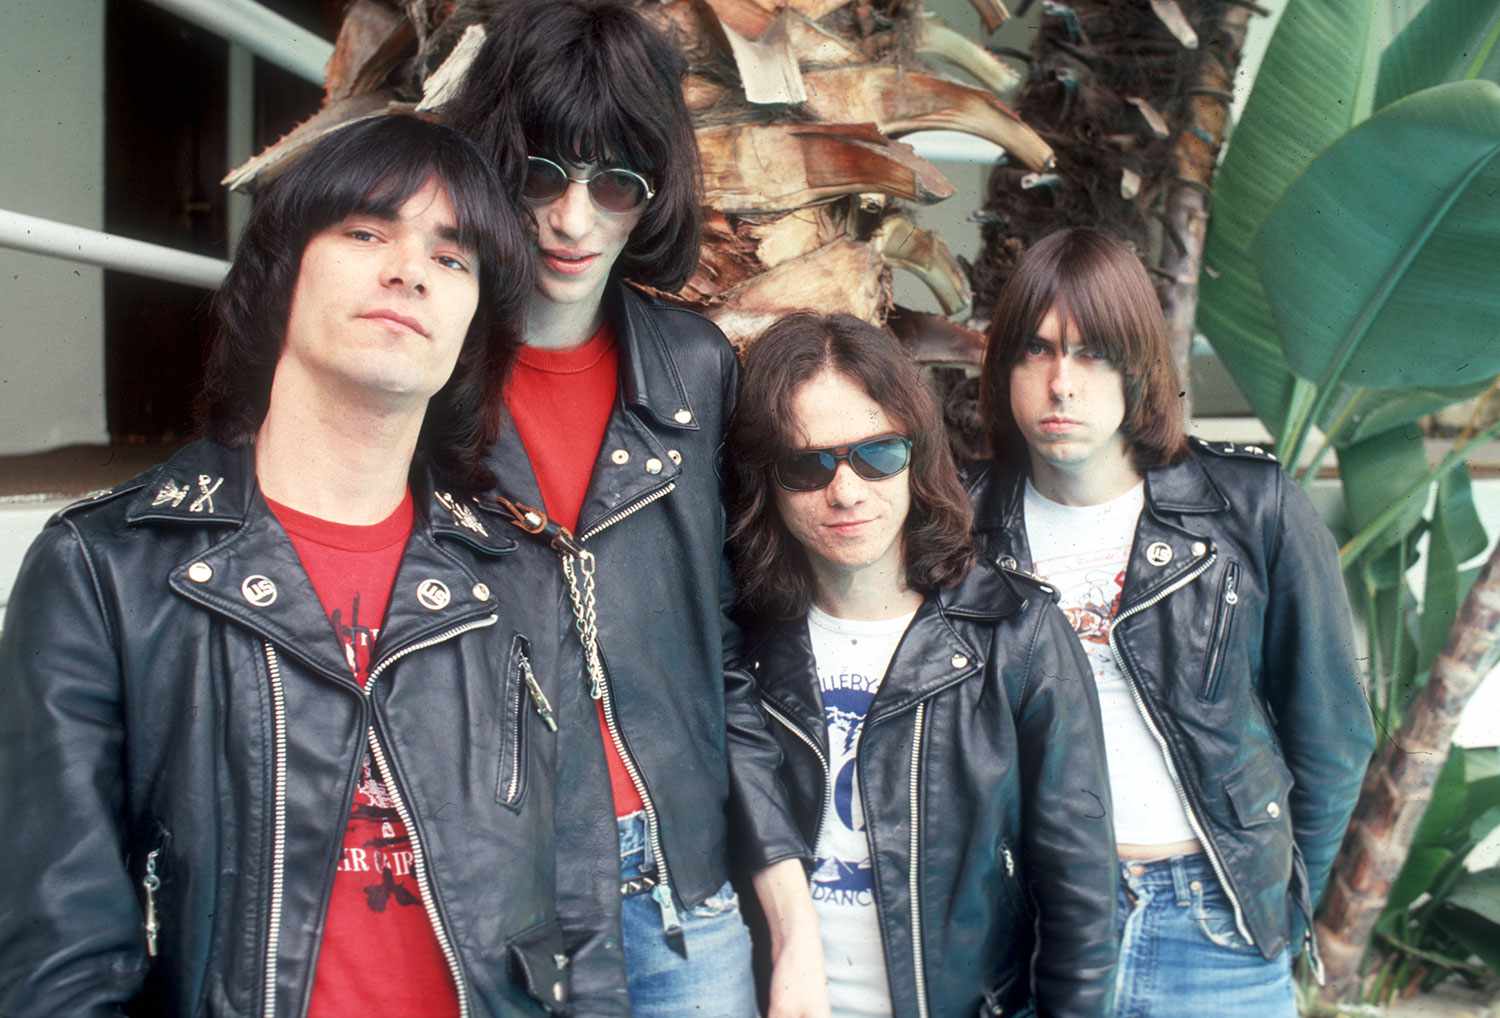 16 Facts About Ramones - Facts.net